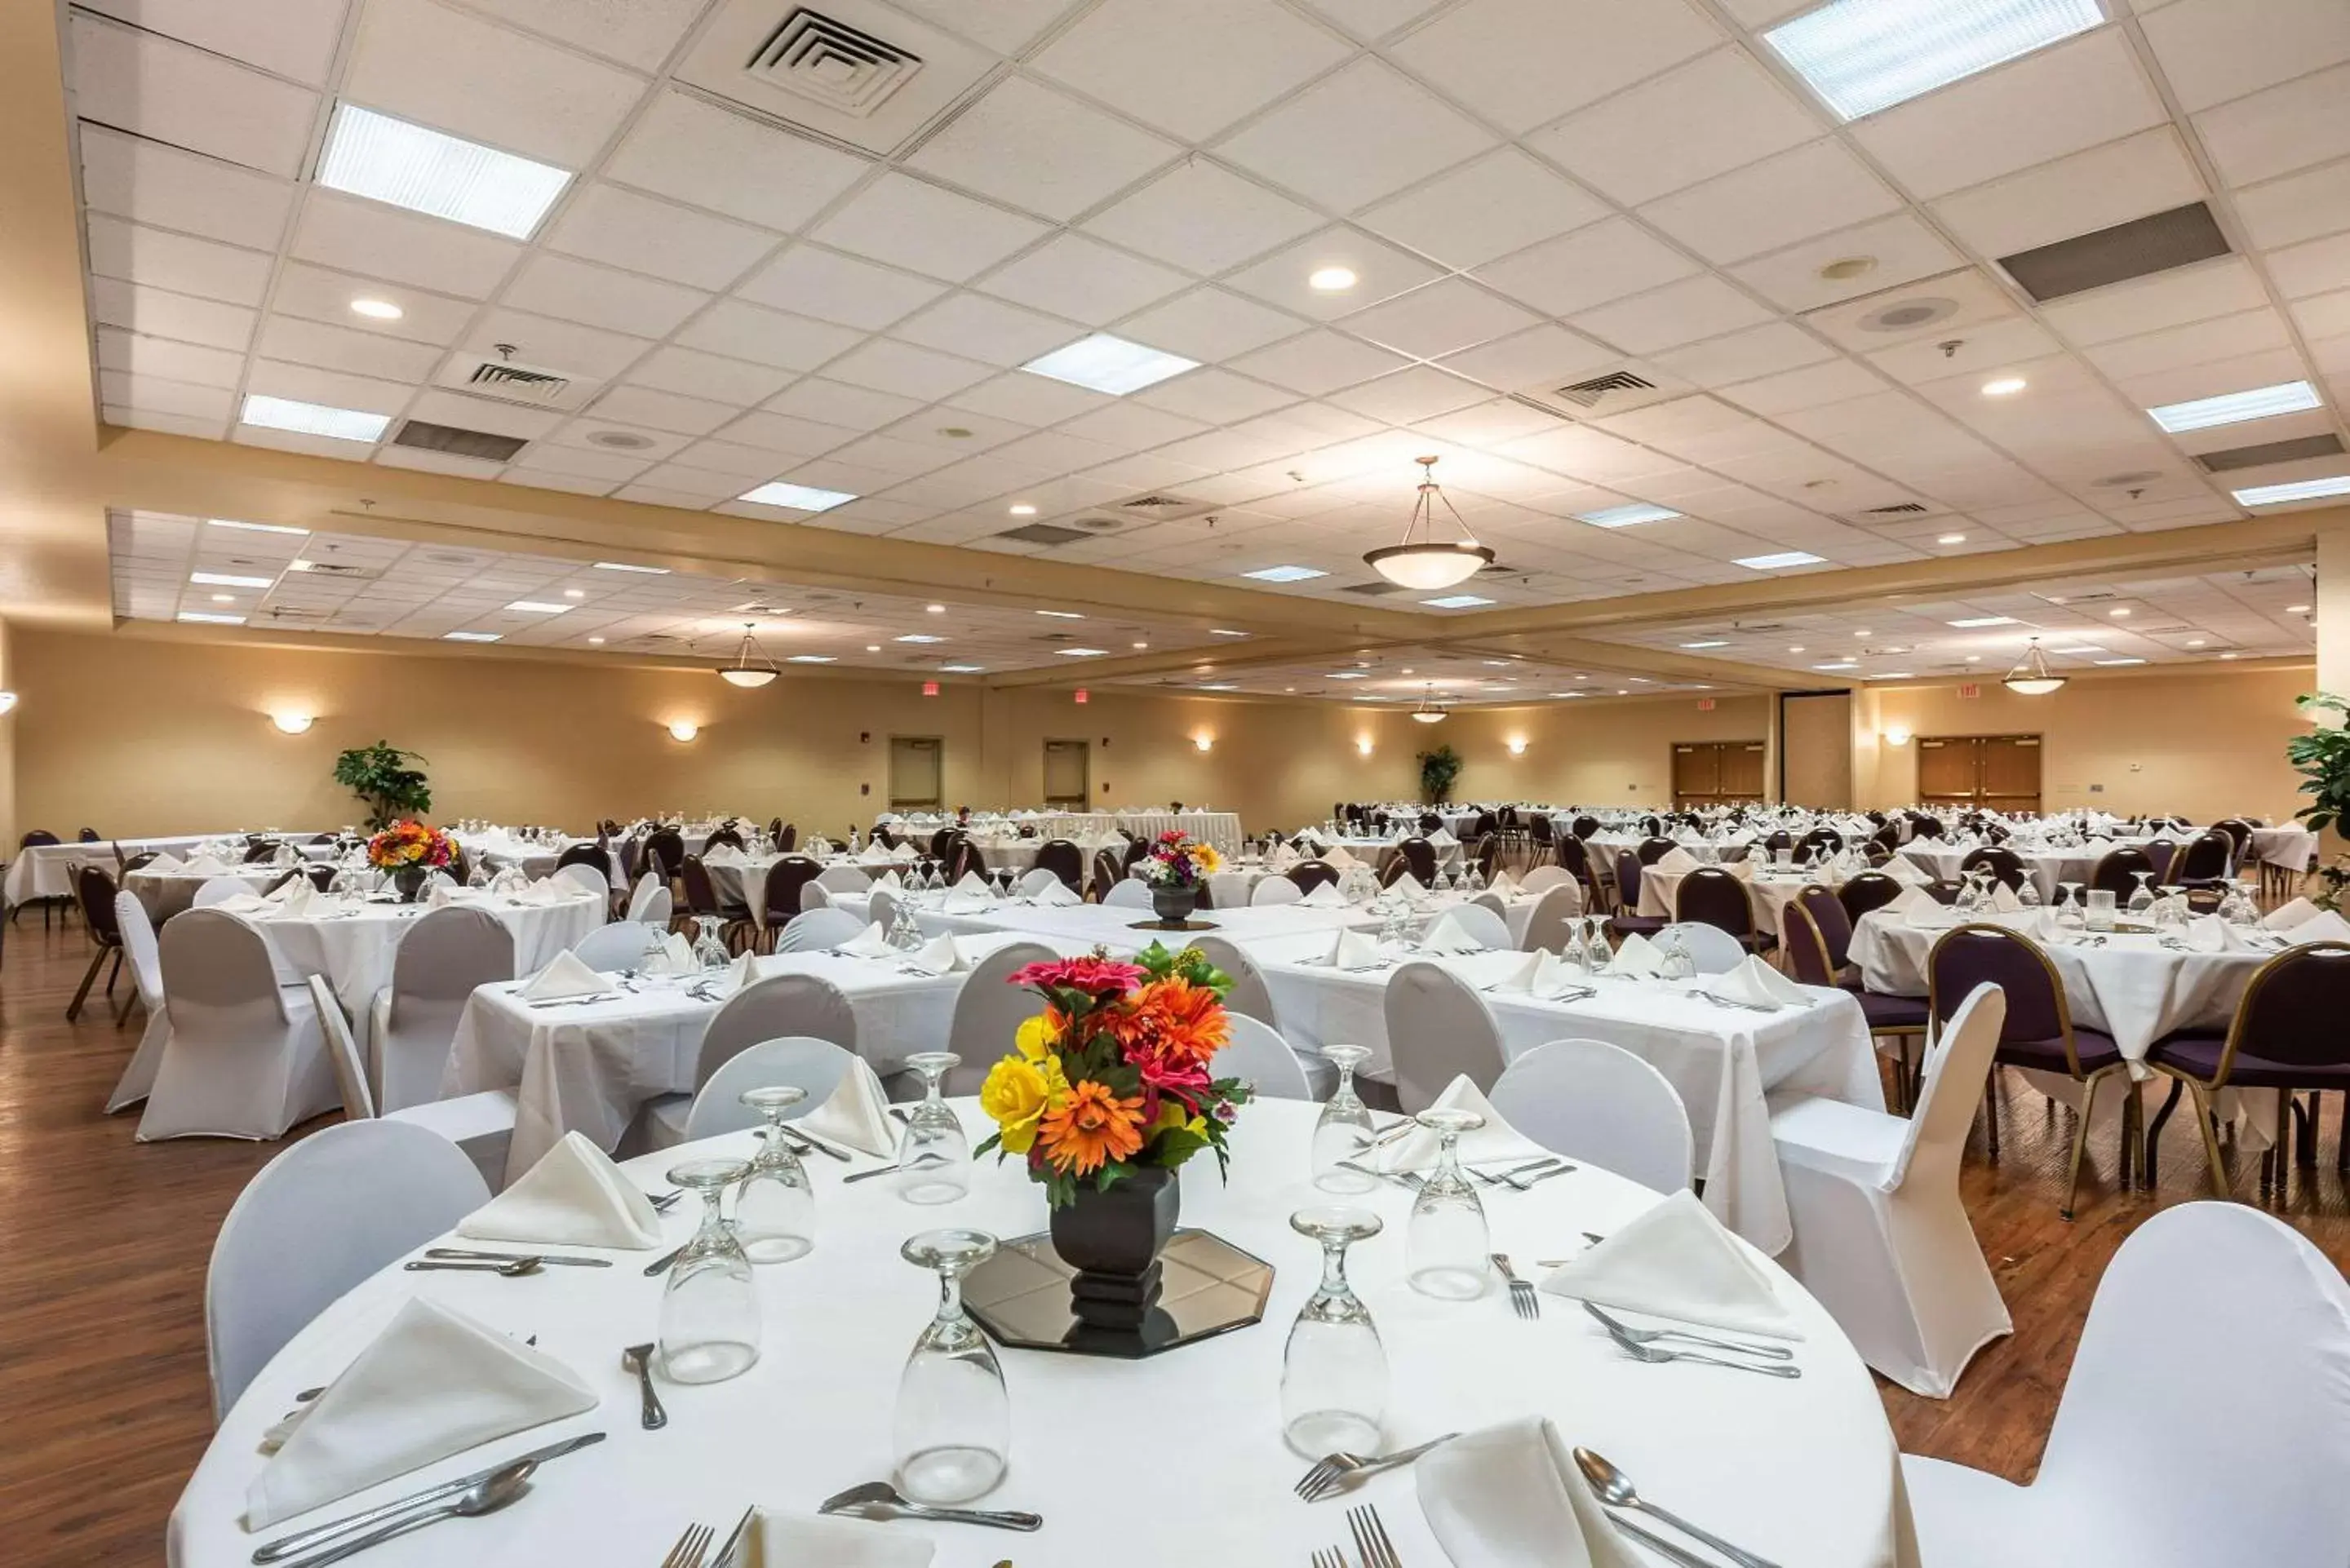 Meeting/conference room, Banquet Facilities in Quality Inn & Suites Hannibal